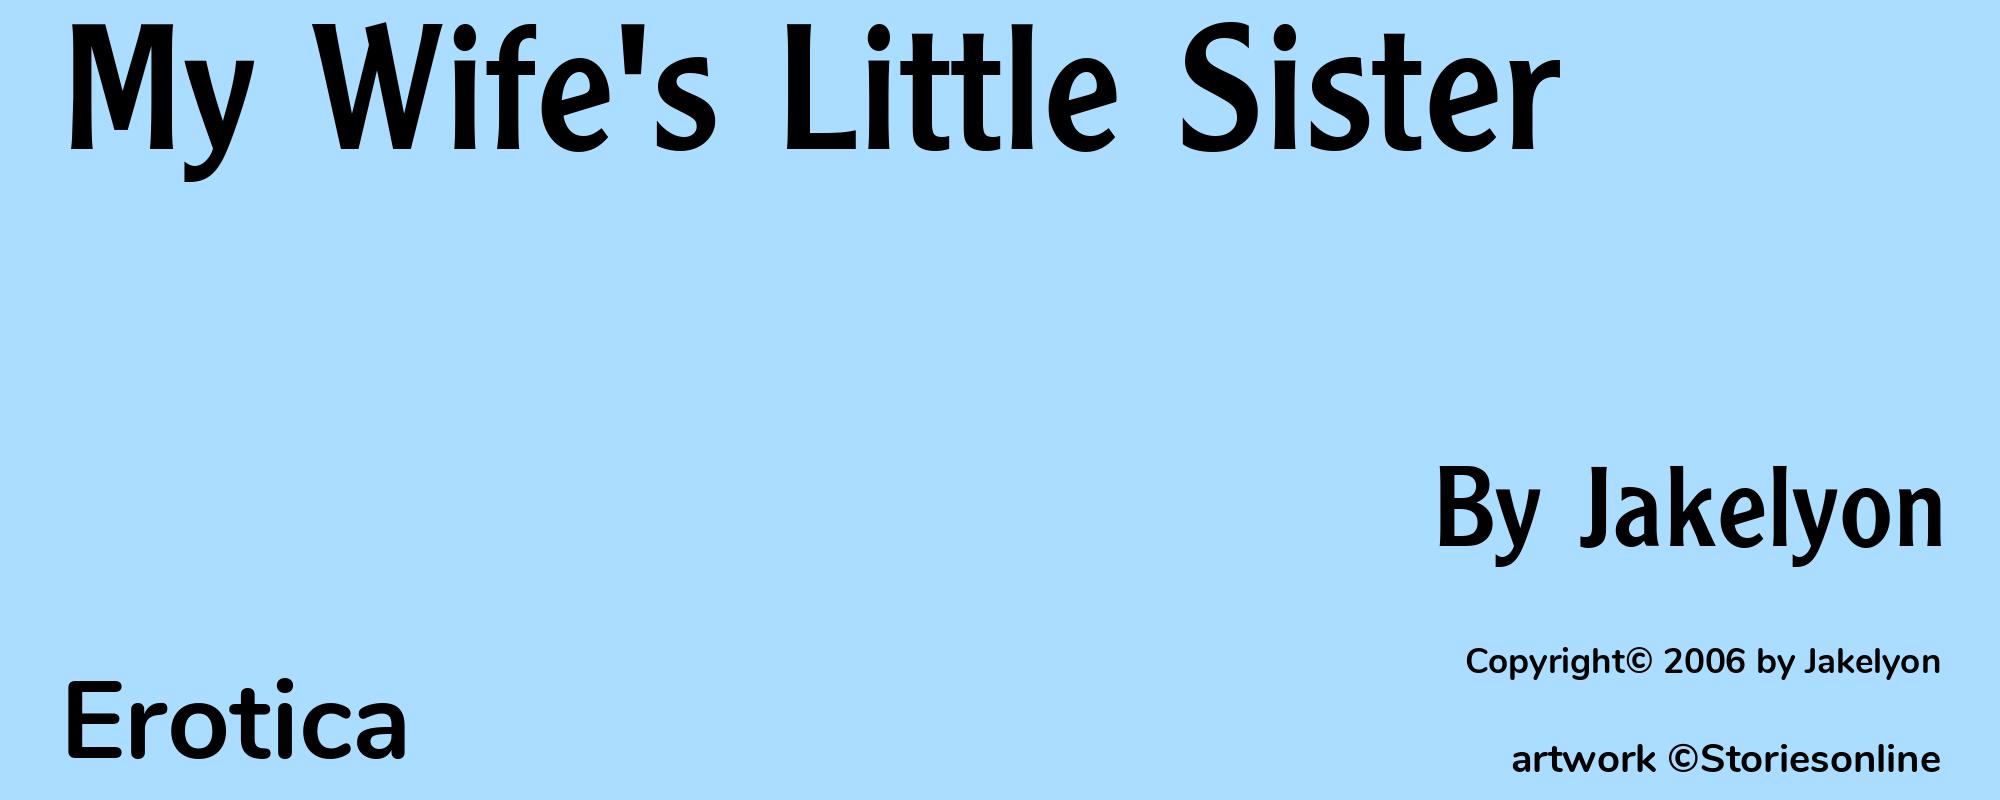 My Wife's Little Sister - Cover